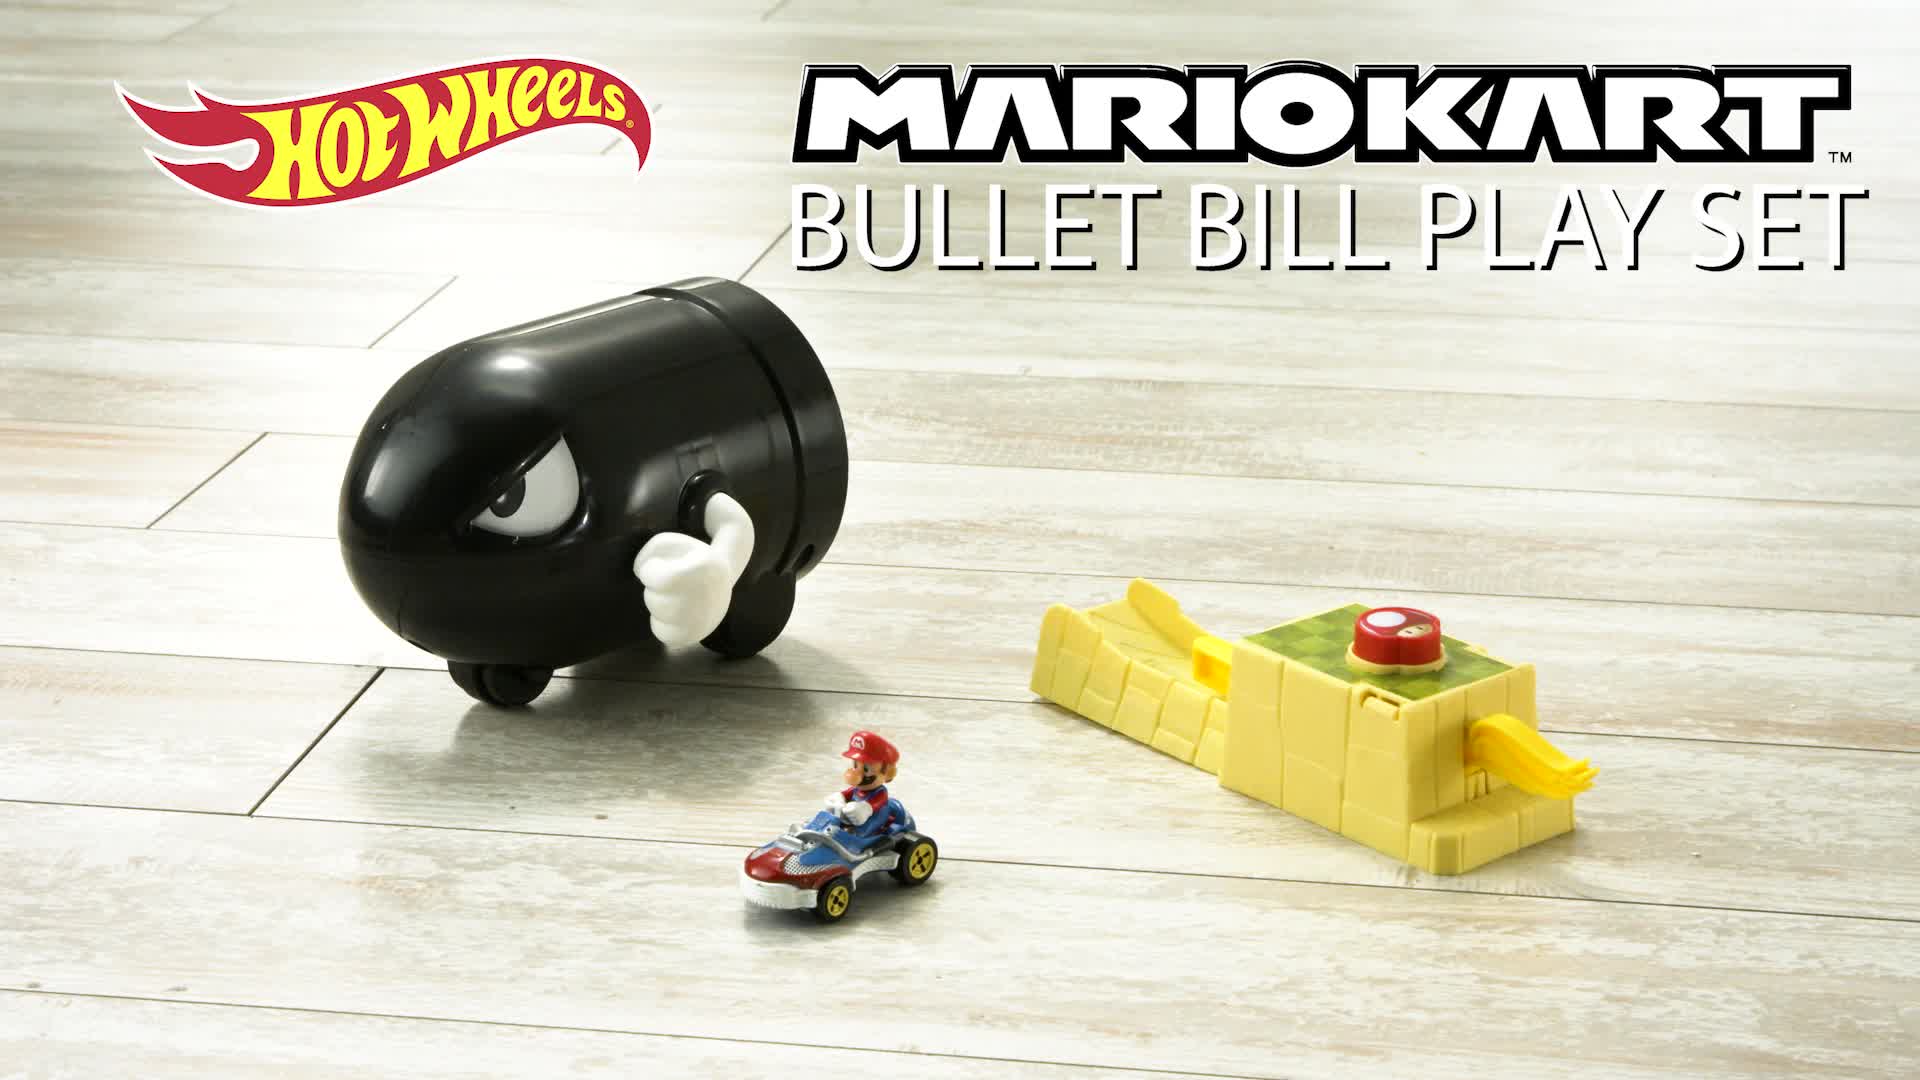 Hot Wheels Mario Kart Bullet Bill Launcher and Mario Kart Vehicle for Kids Ages 4 6 5 8 7 